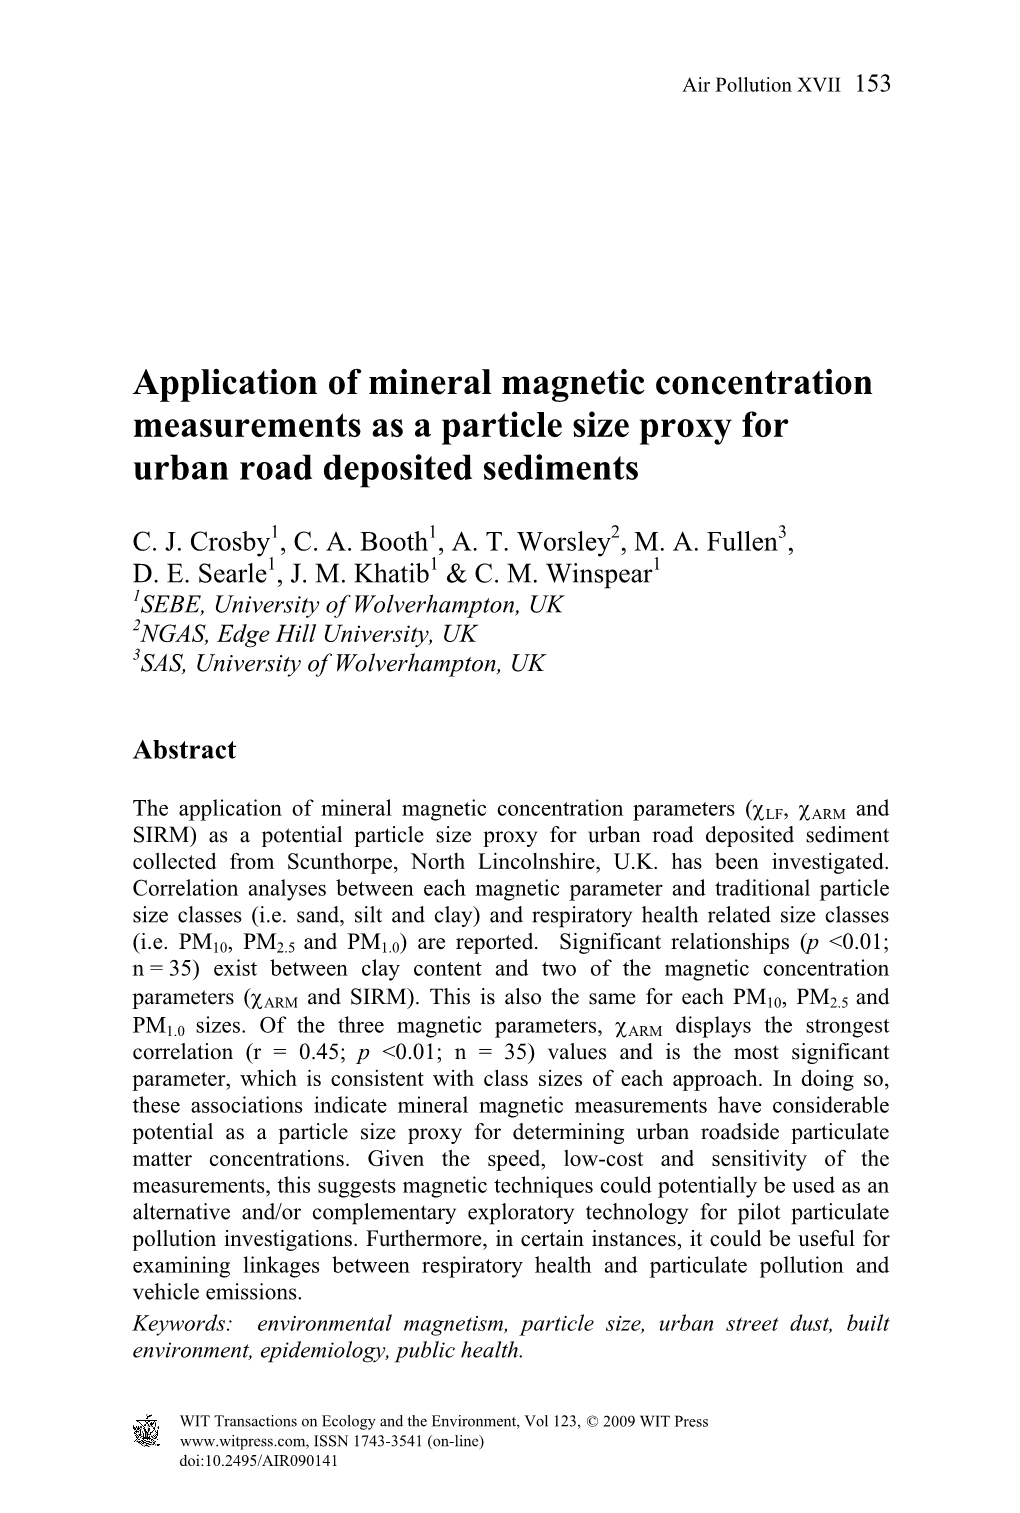 Application of Mineral Magnetic Concentration Measurements As a Particle Size Proxy for Urban Road Deposited Sediments